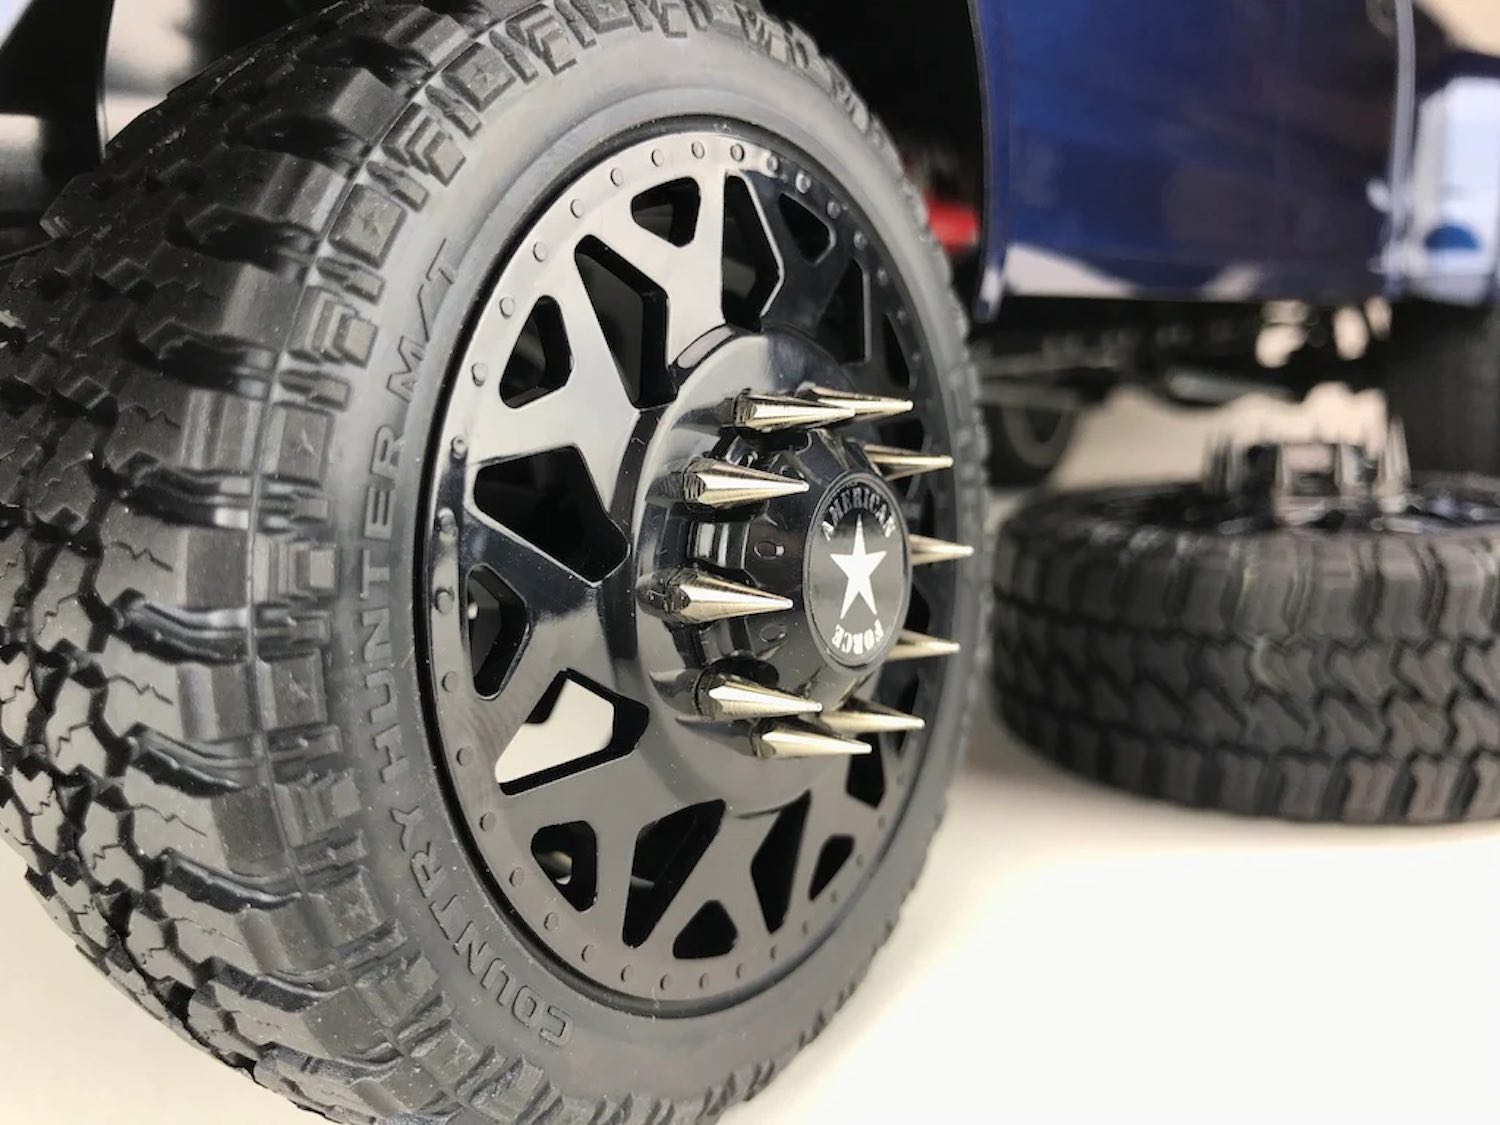 The spiked lug nuts on the aftermarket rims of a lifted pickup truck.